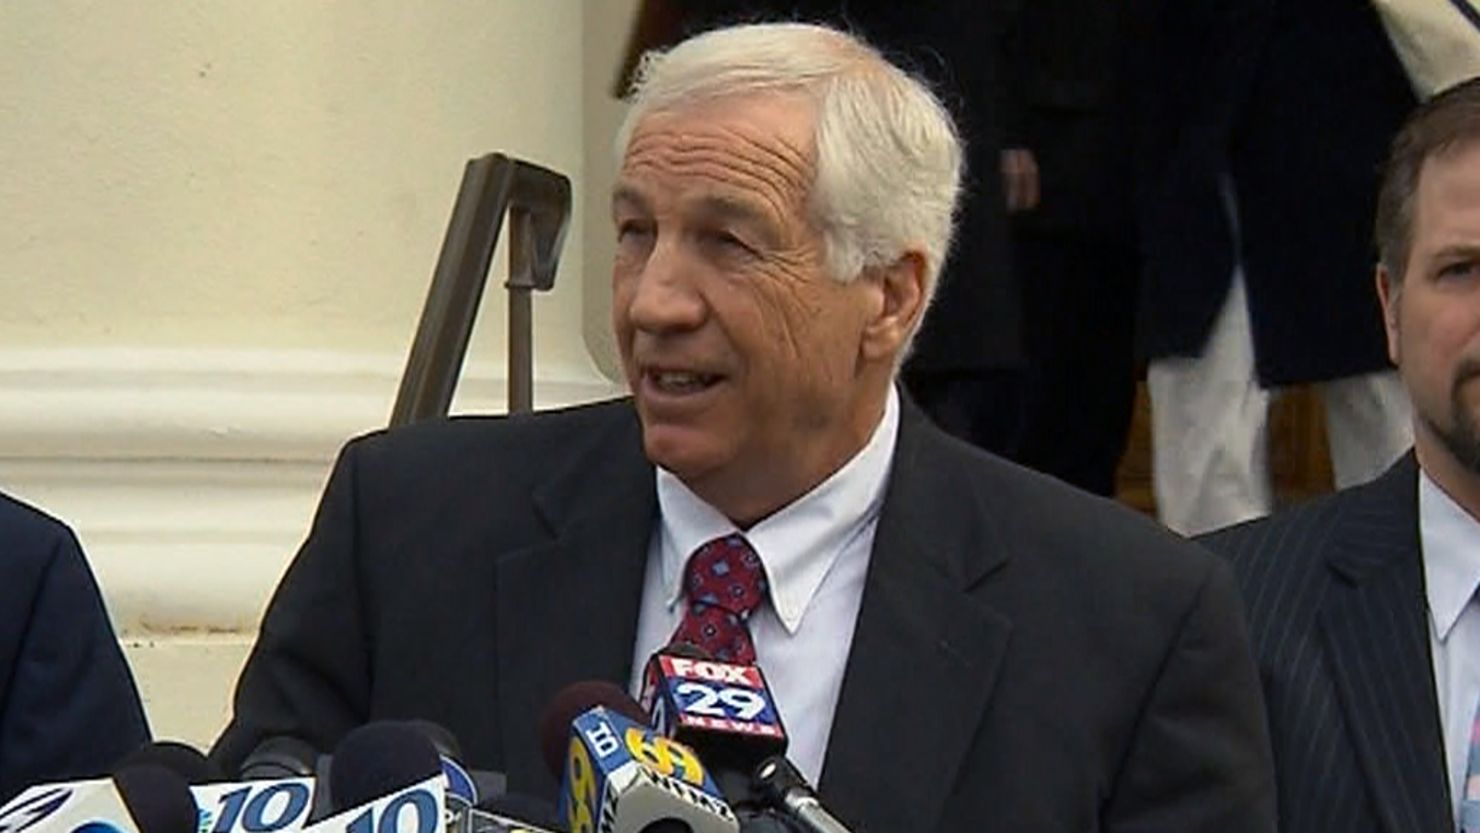 Former Penn State assistant coach Jerry Sandusky, who is accused of molesting boys, may now be the subject of a federal investigation.